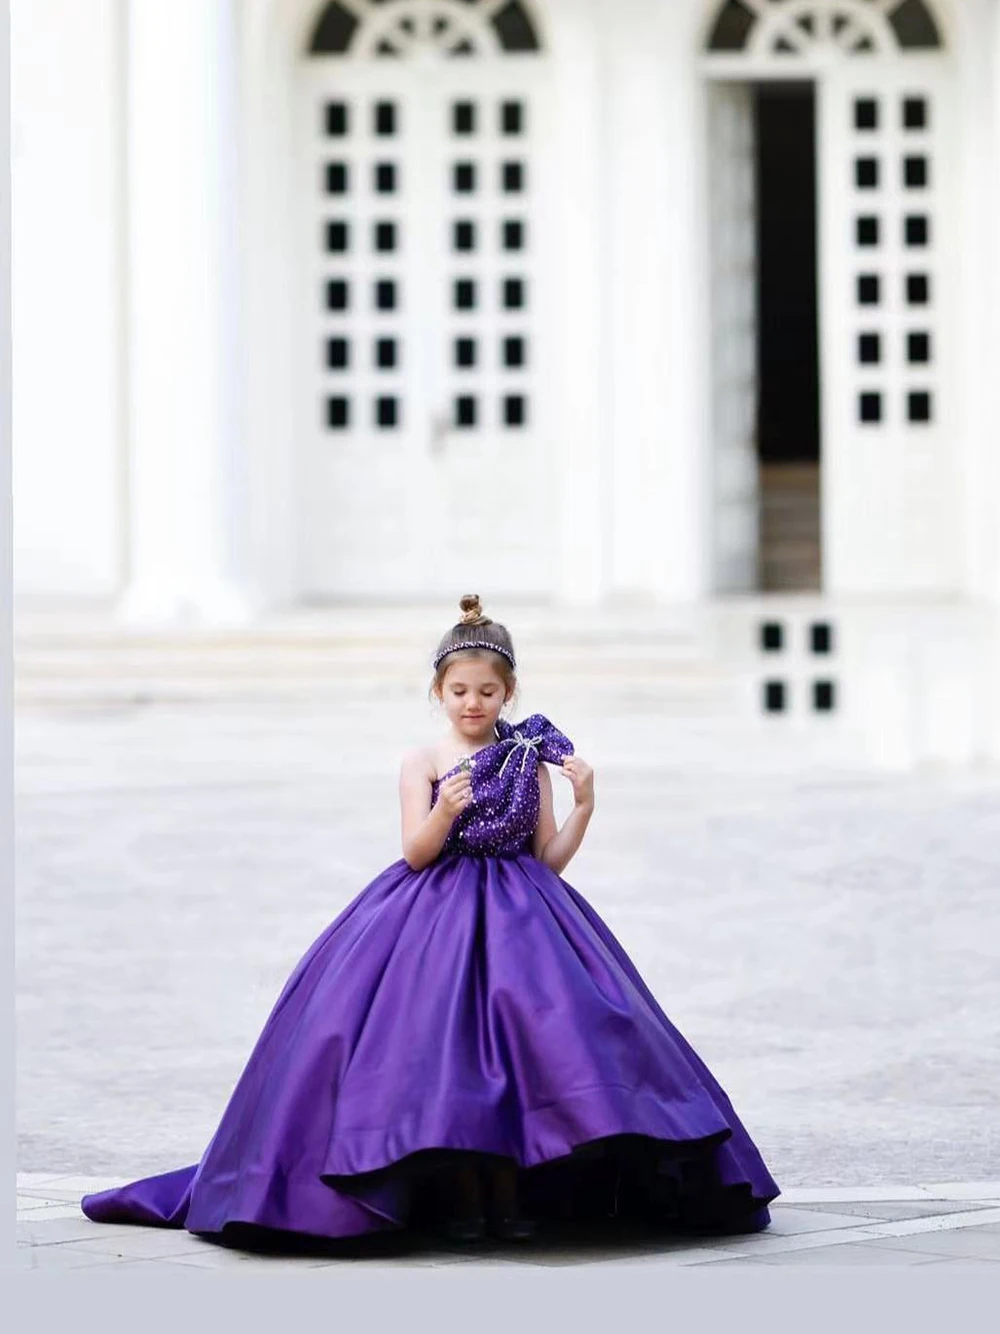 

Purple Satin Flower Girl Dress For Wedding Sleeveless Glitter Sequins With Bow Child First Eucharistic Birthday Party Dresses